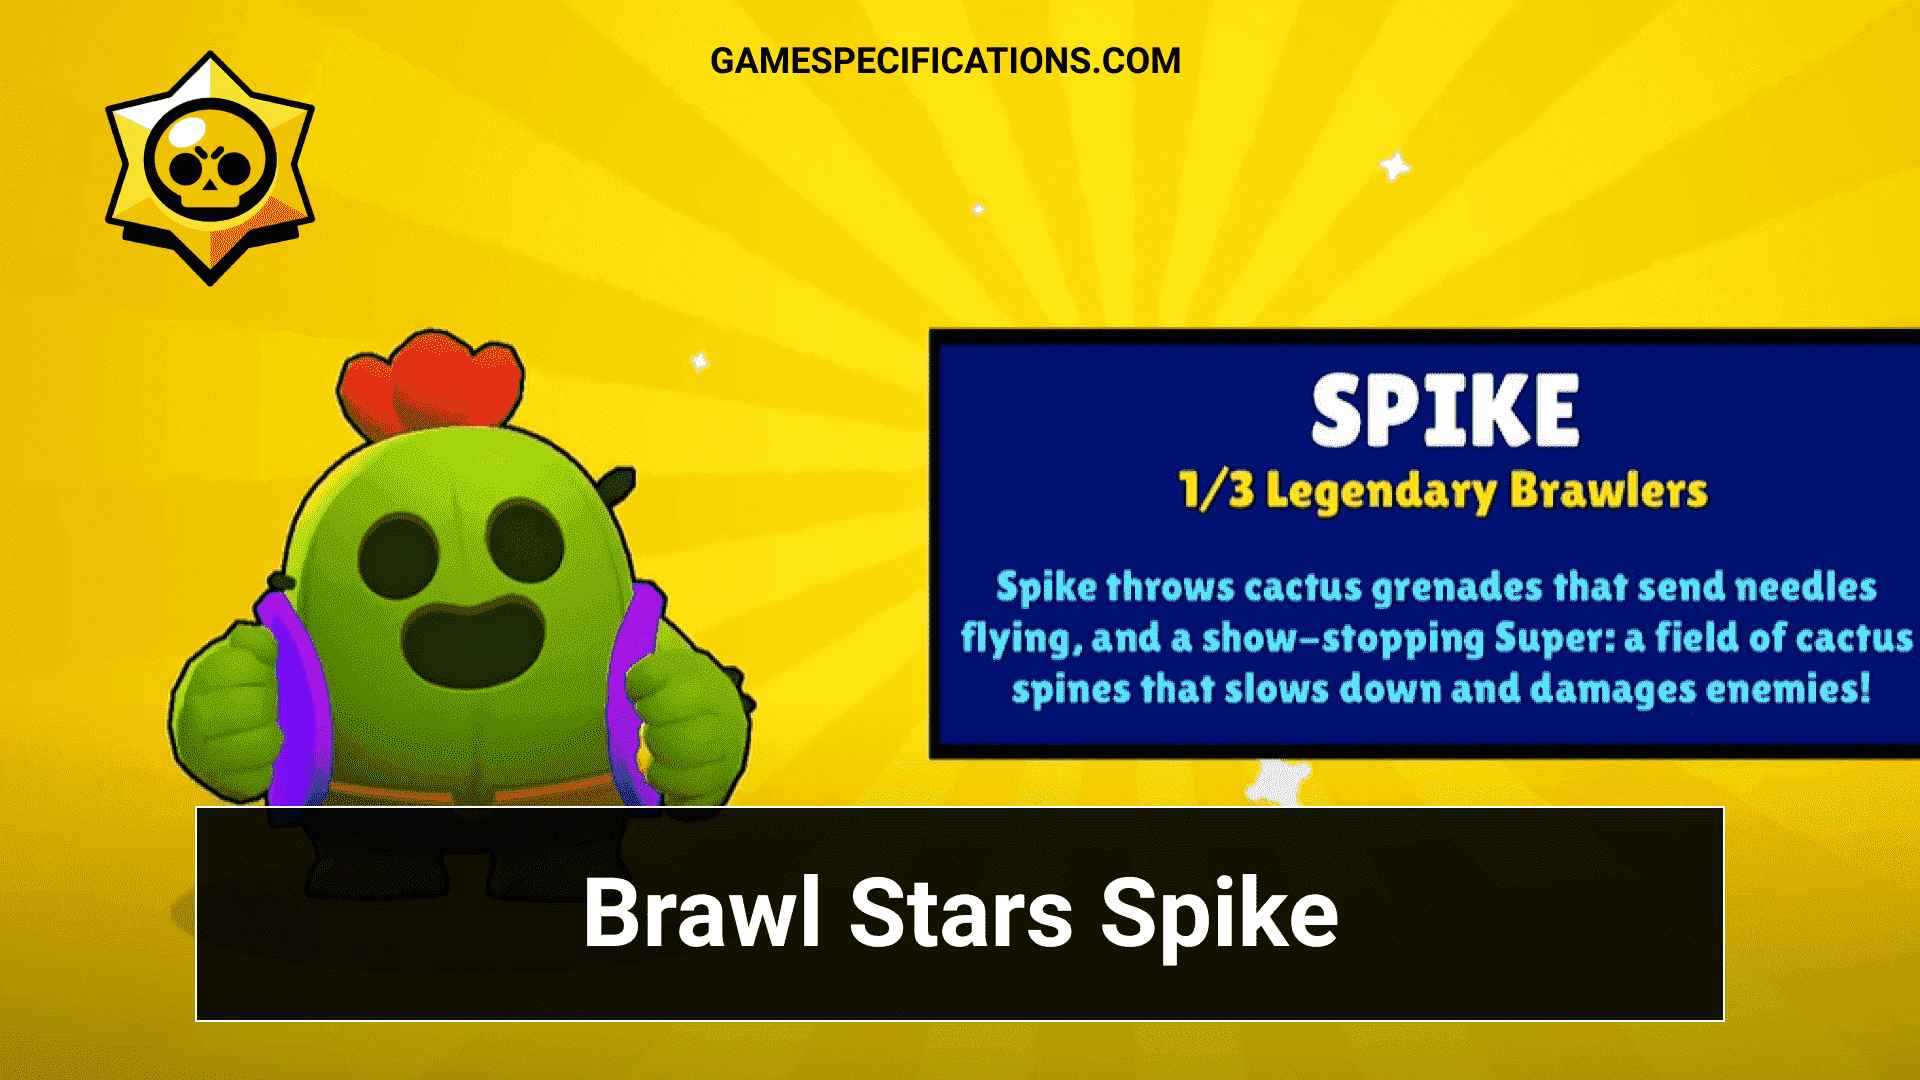 Brawl Stars Spike Introducing The Legendary Character In The Game Game Specifications - star keys brawl stars